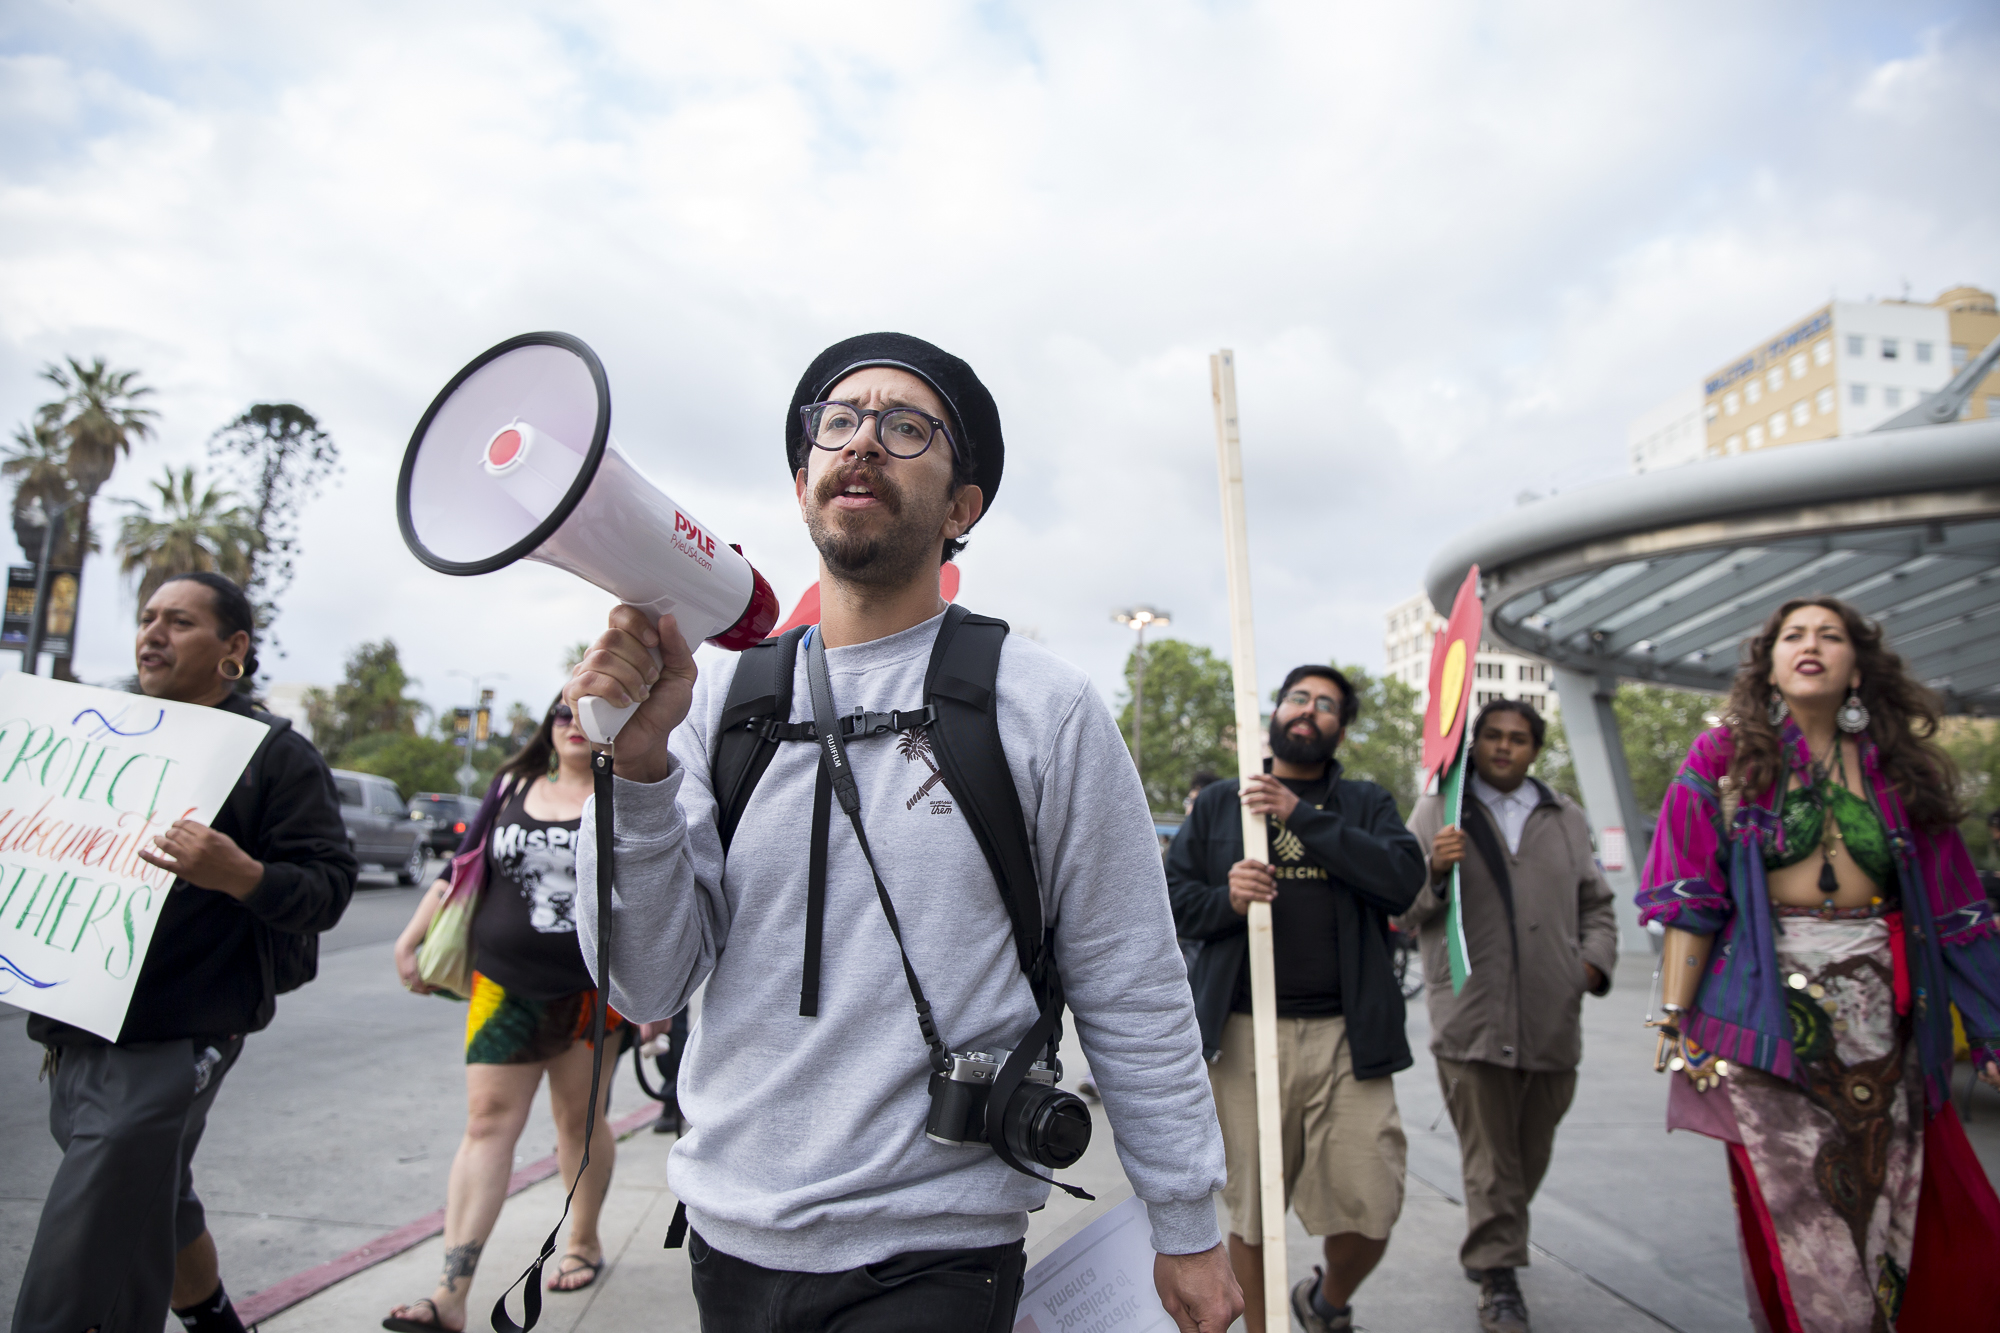  Movimiento Cosecha member Joseph Nicks leads the undocumented immigrant mother’s march down Alvarado Street in downtown Los Angeles, California on Saturday, May 12 2018. The rally, organized by immigration advocacy group Movimiento Cosecha, called o